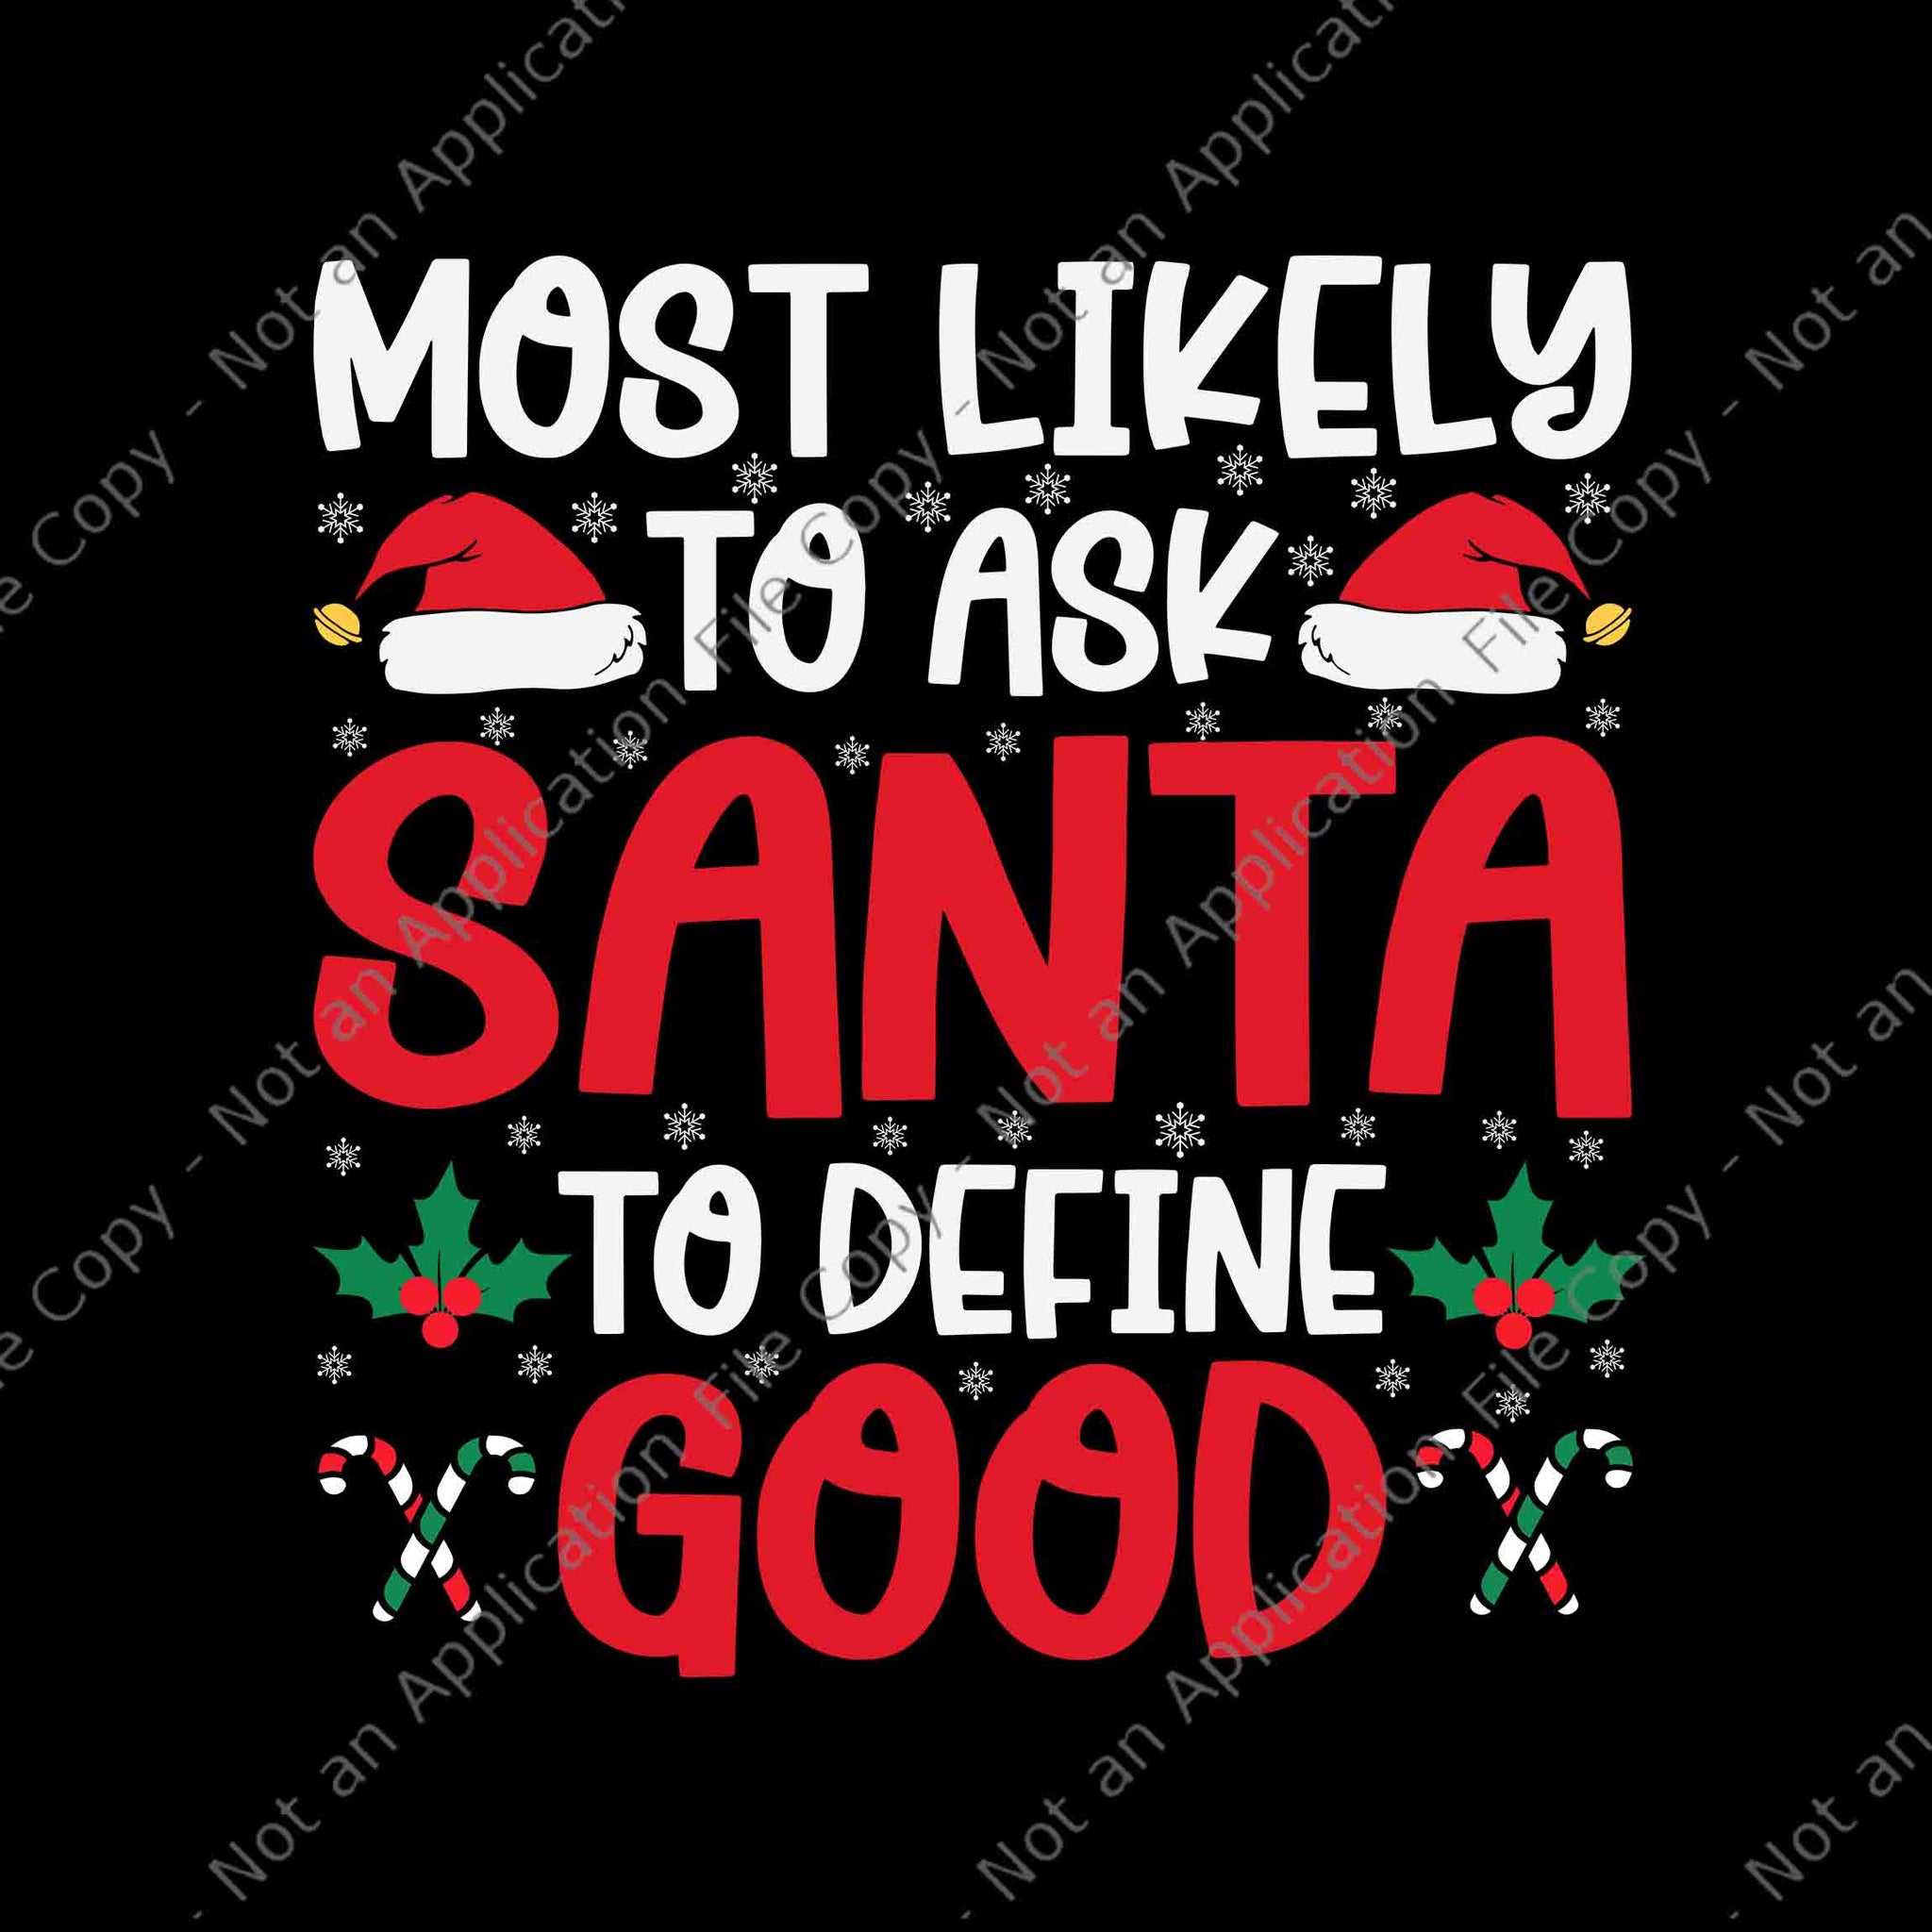 Most Likely To Ask Santa To Define Good Christmas Svg, Santa Svg, Santa Christmas Svg, Santa Xmas Svg, Christmas Svg